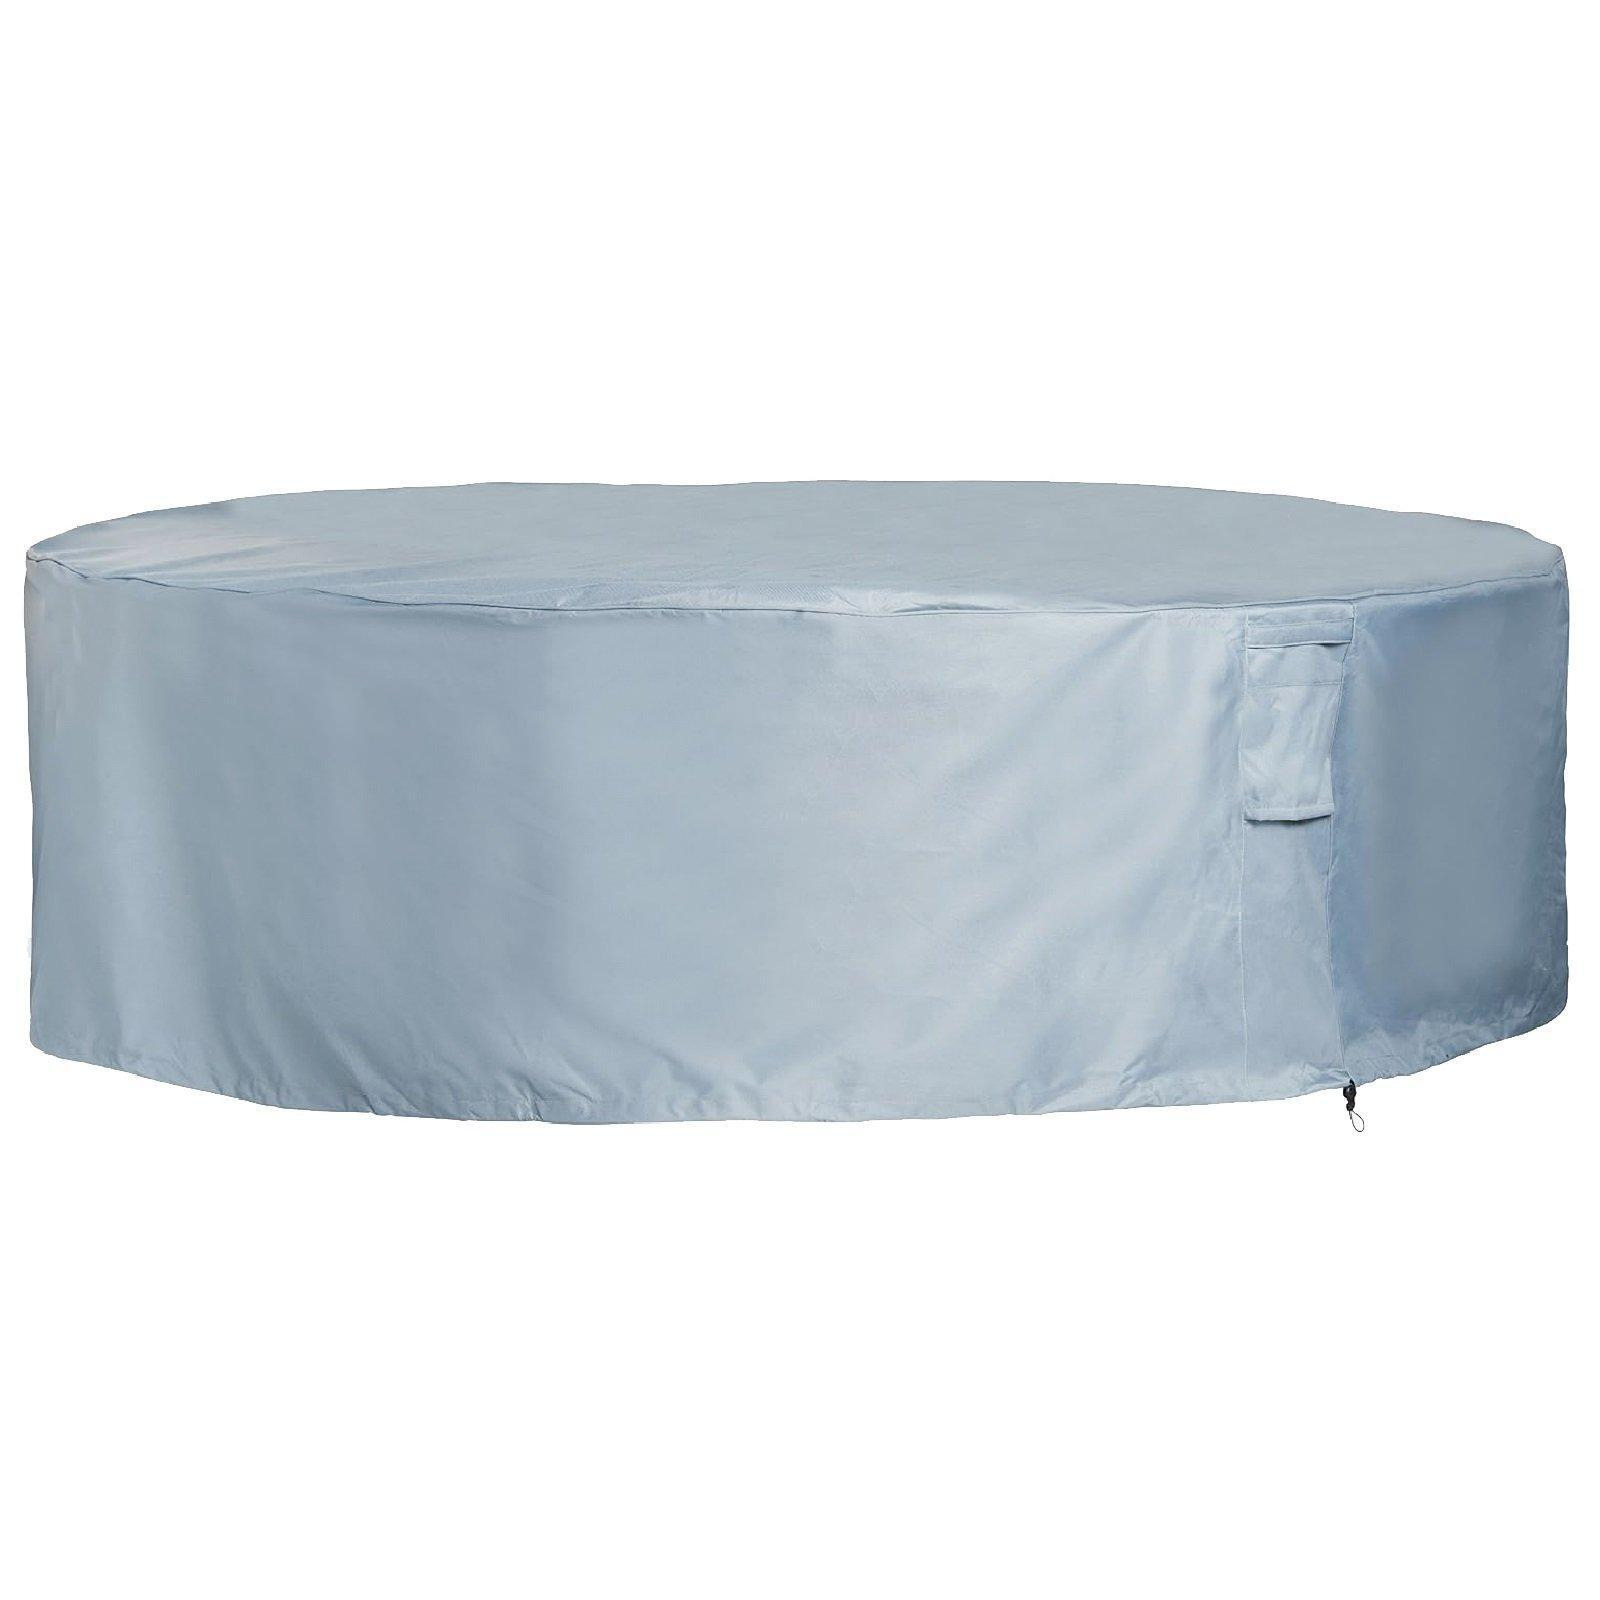 Garden Waterproof Large Round Table Chairs Cover Protector - image 1